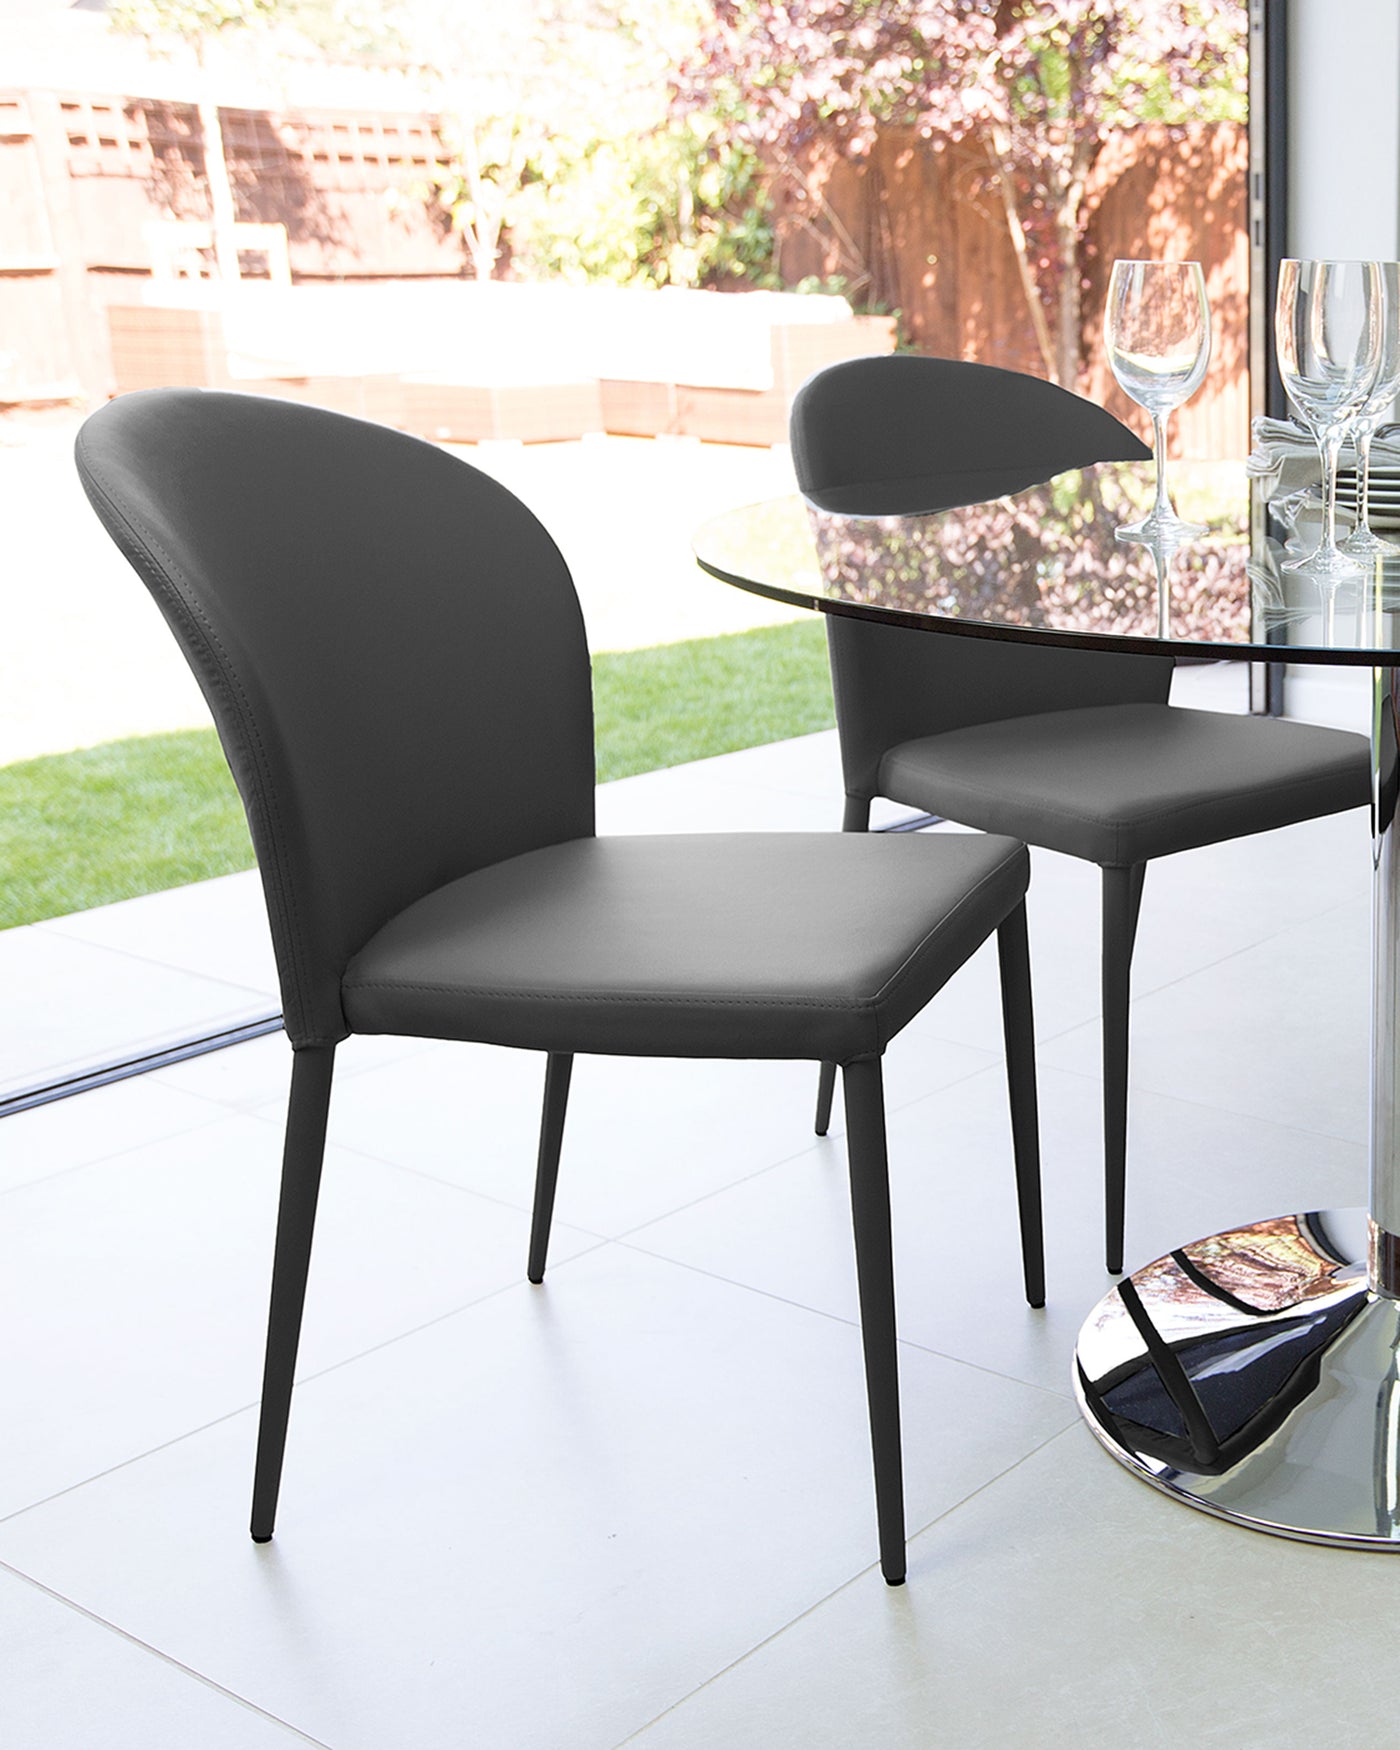 Elegant modern dining chairs in black, featuring a streamlined design with a curved backrest and a comfortable padded seat, set against a minimalist dining table with a reflective surface and cylindrical base.